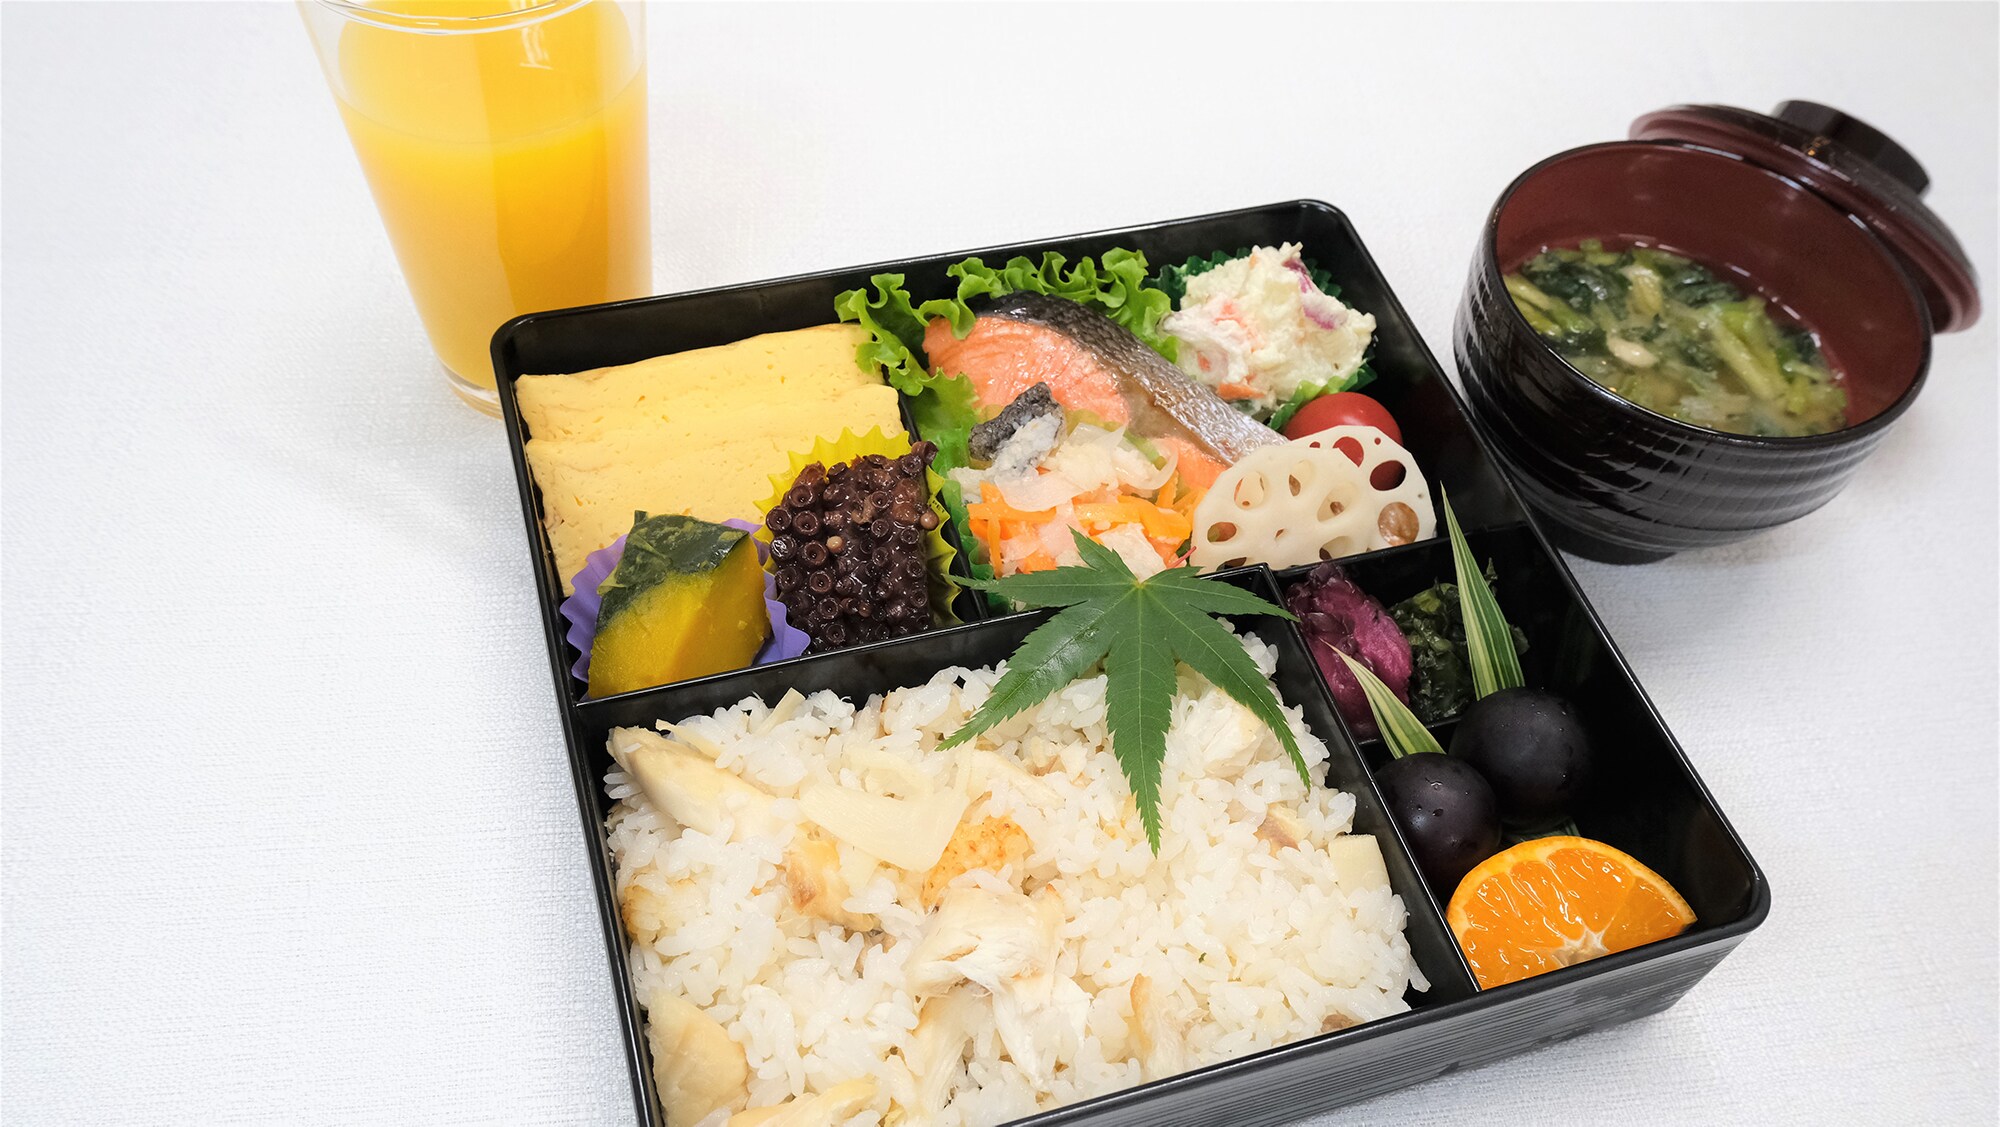 Breakfast is a Japanese bento that is particular about local production for local consumption in Kumamoto. * The photo is for illustrative purposes only.